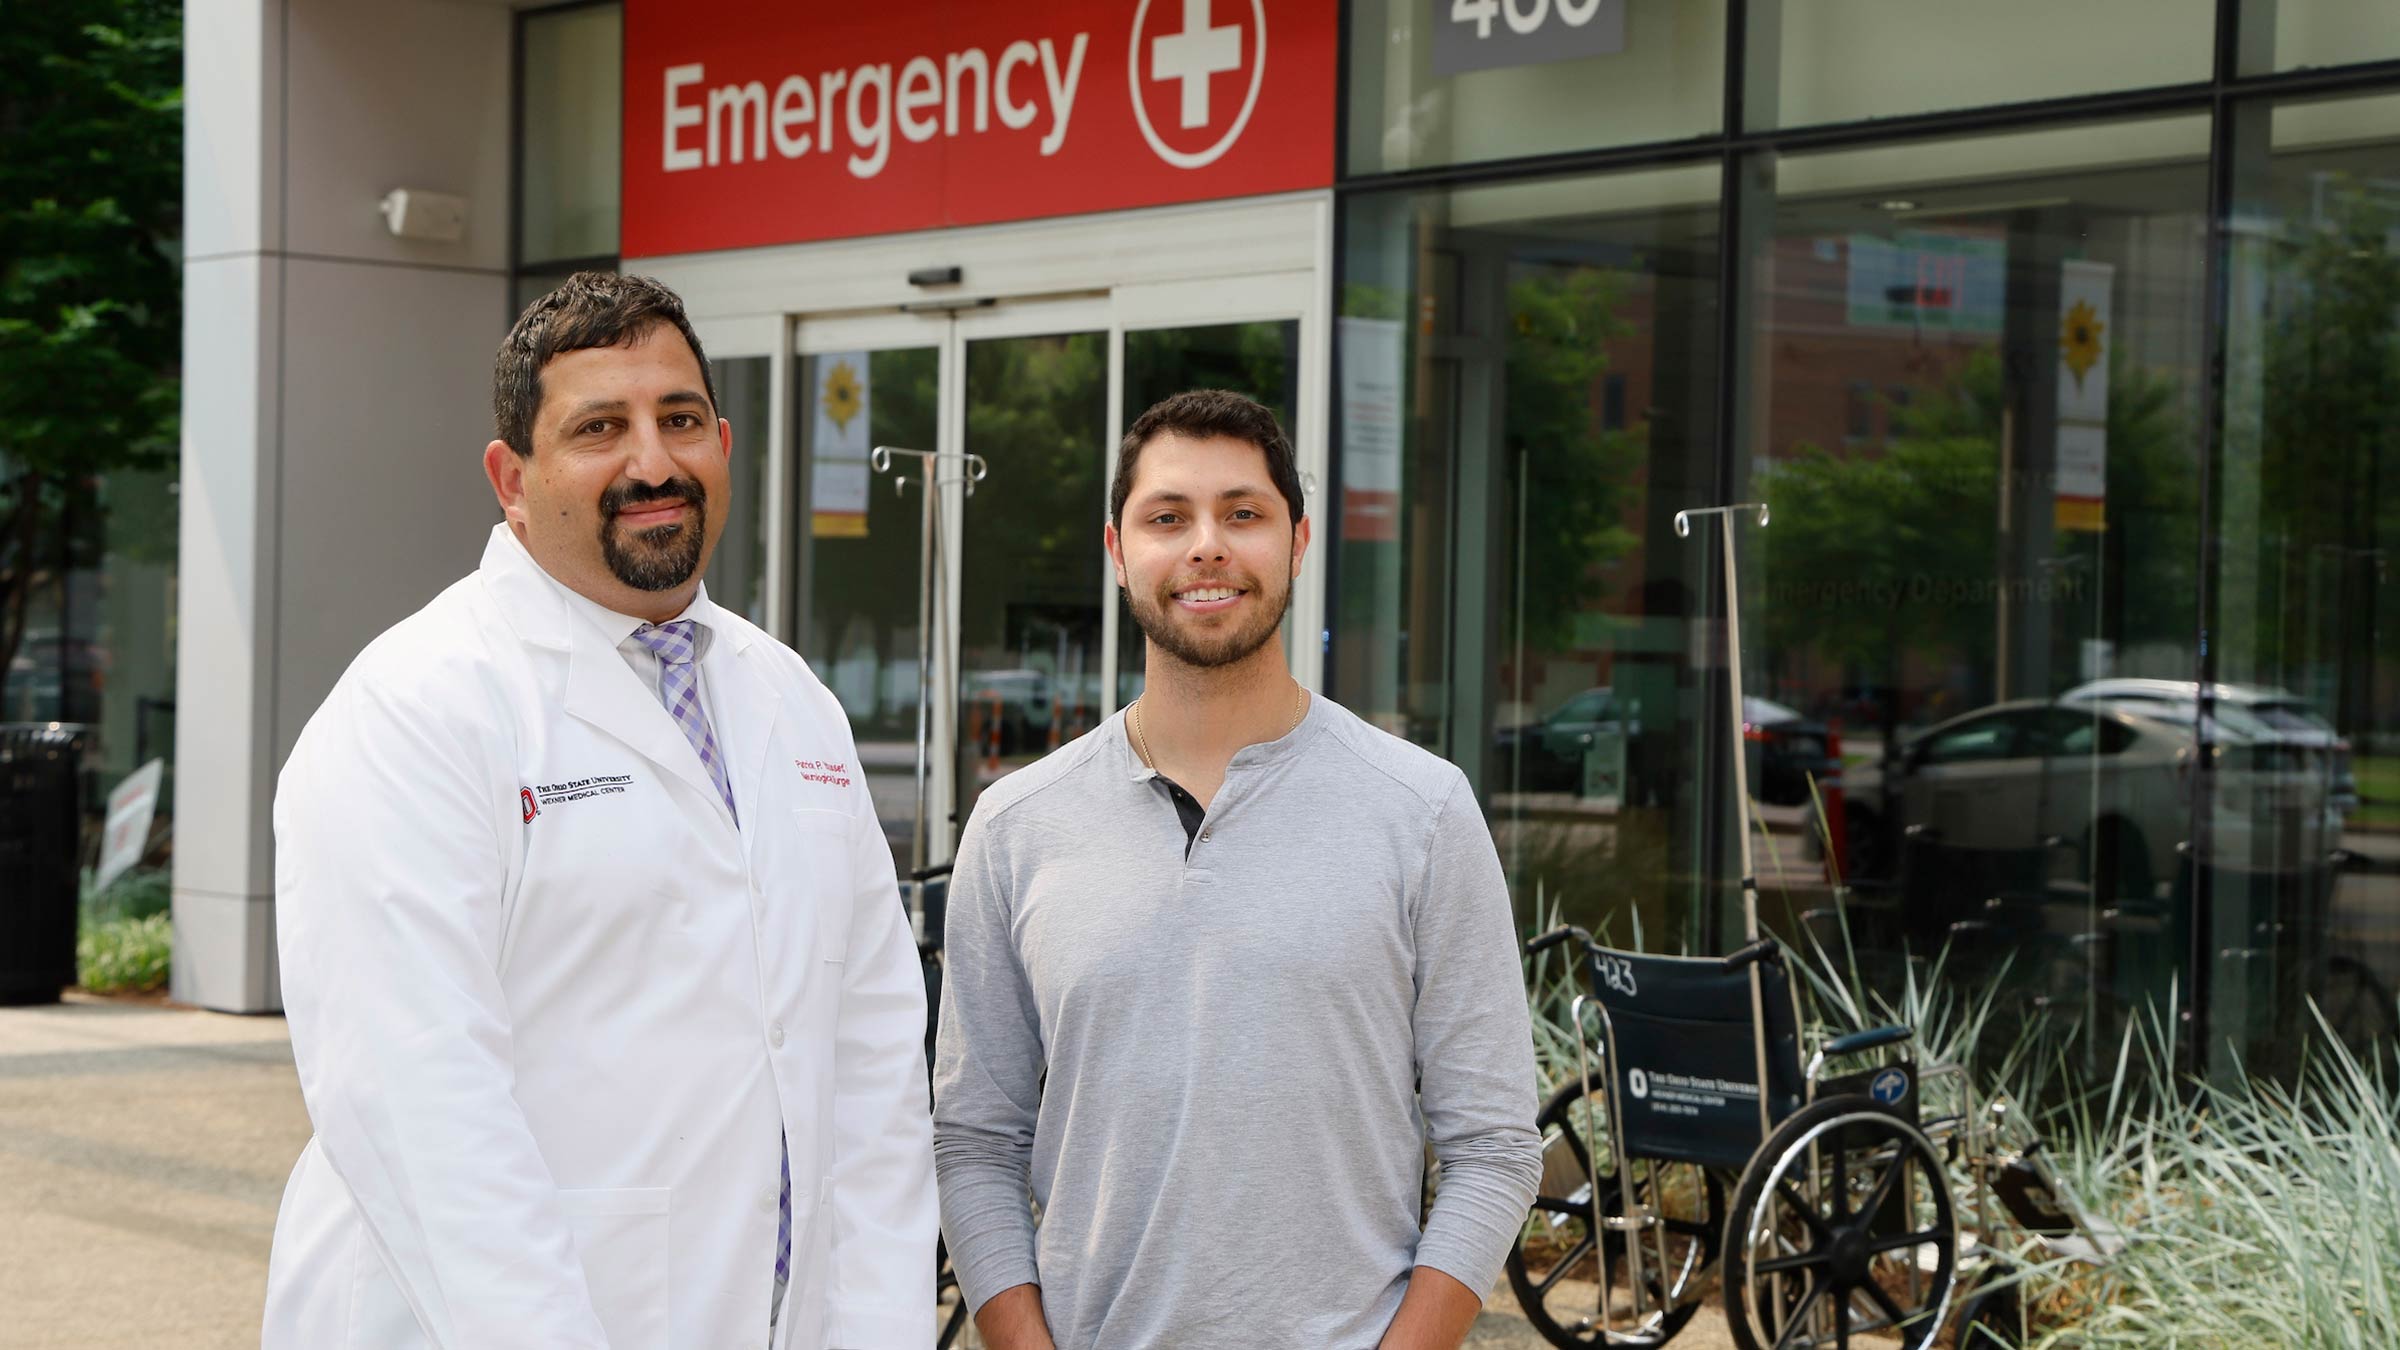 Stephen Vidman, stroke patient, and his doctor, Patrick Youssef, MD, a vascular neurosurgeon in front of the emergency room entrance